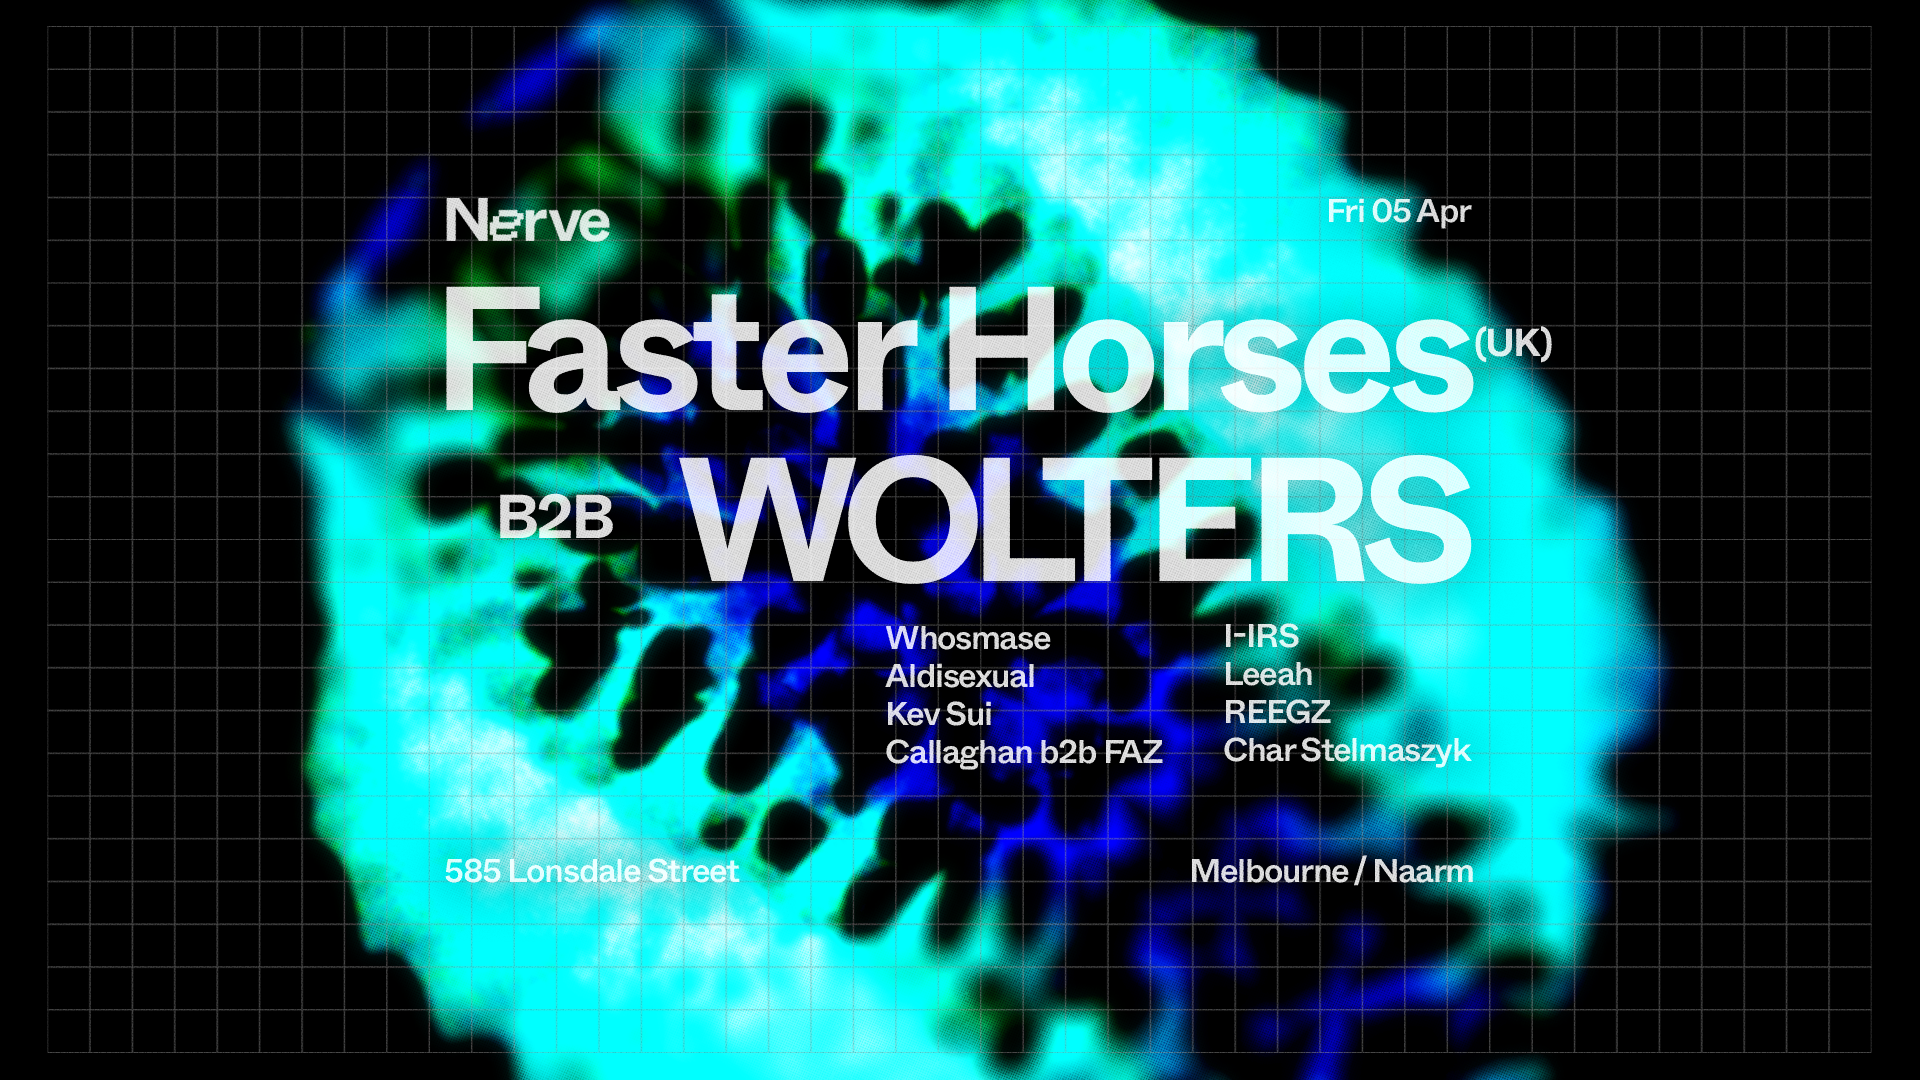 Nerve - Faster Horses (UK) B2B WOLTERS